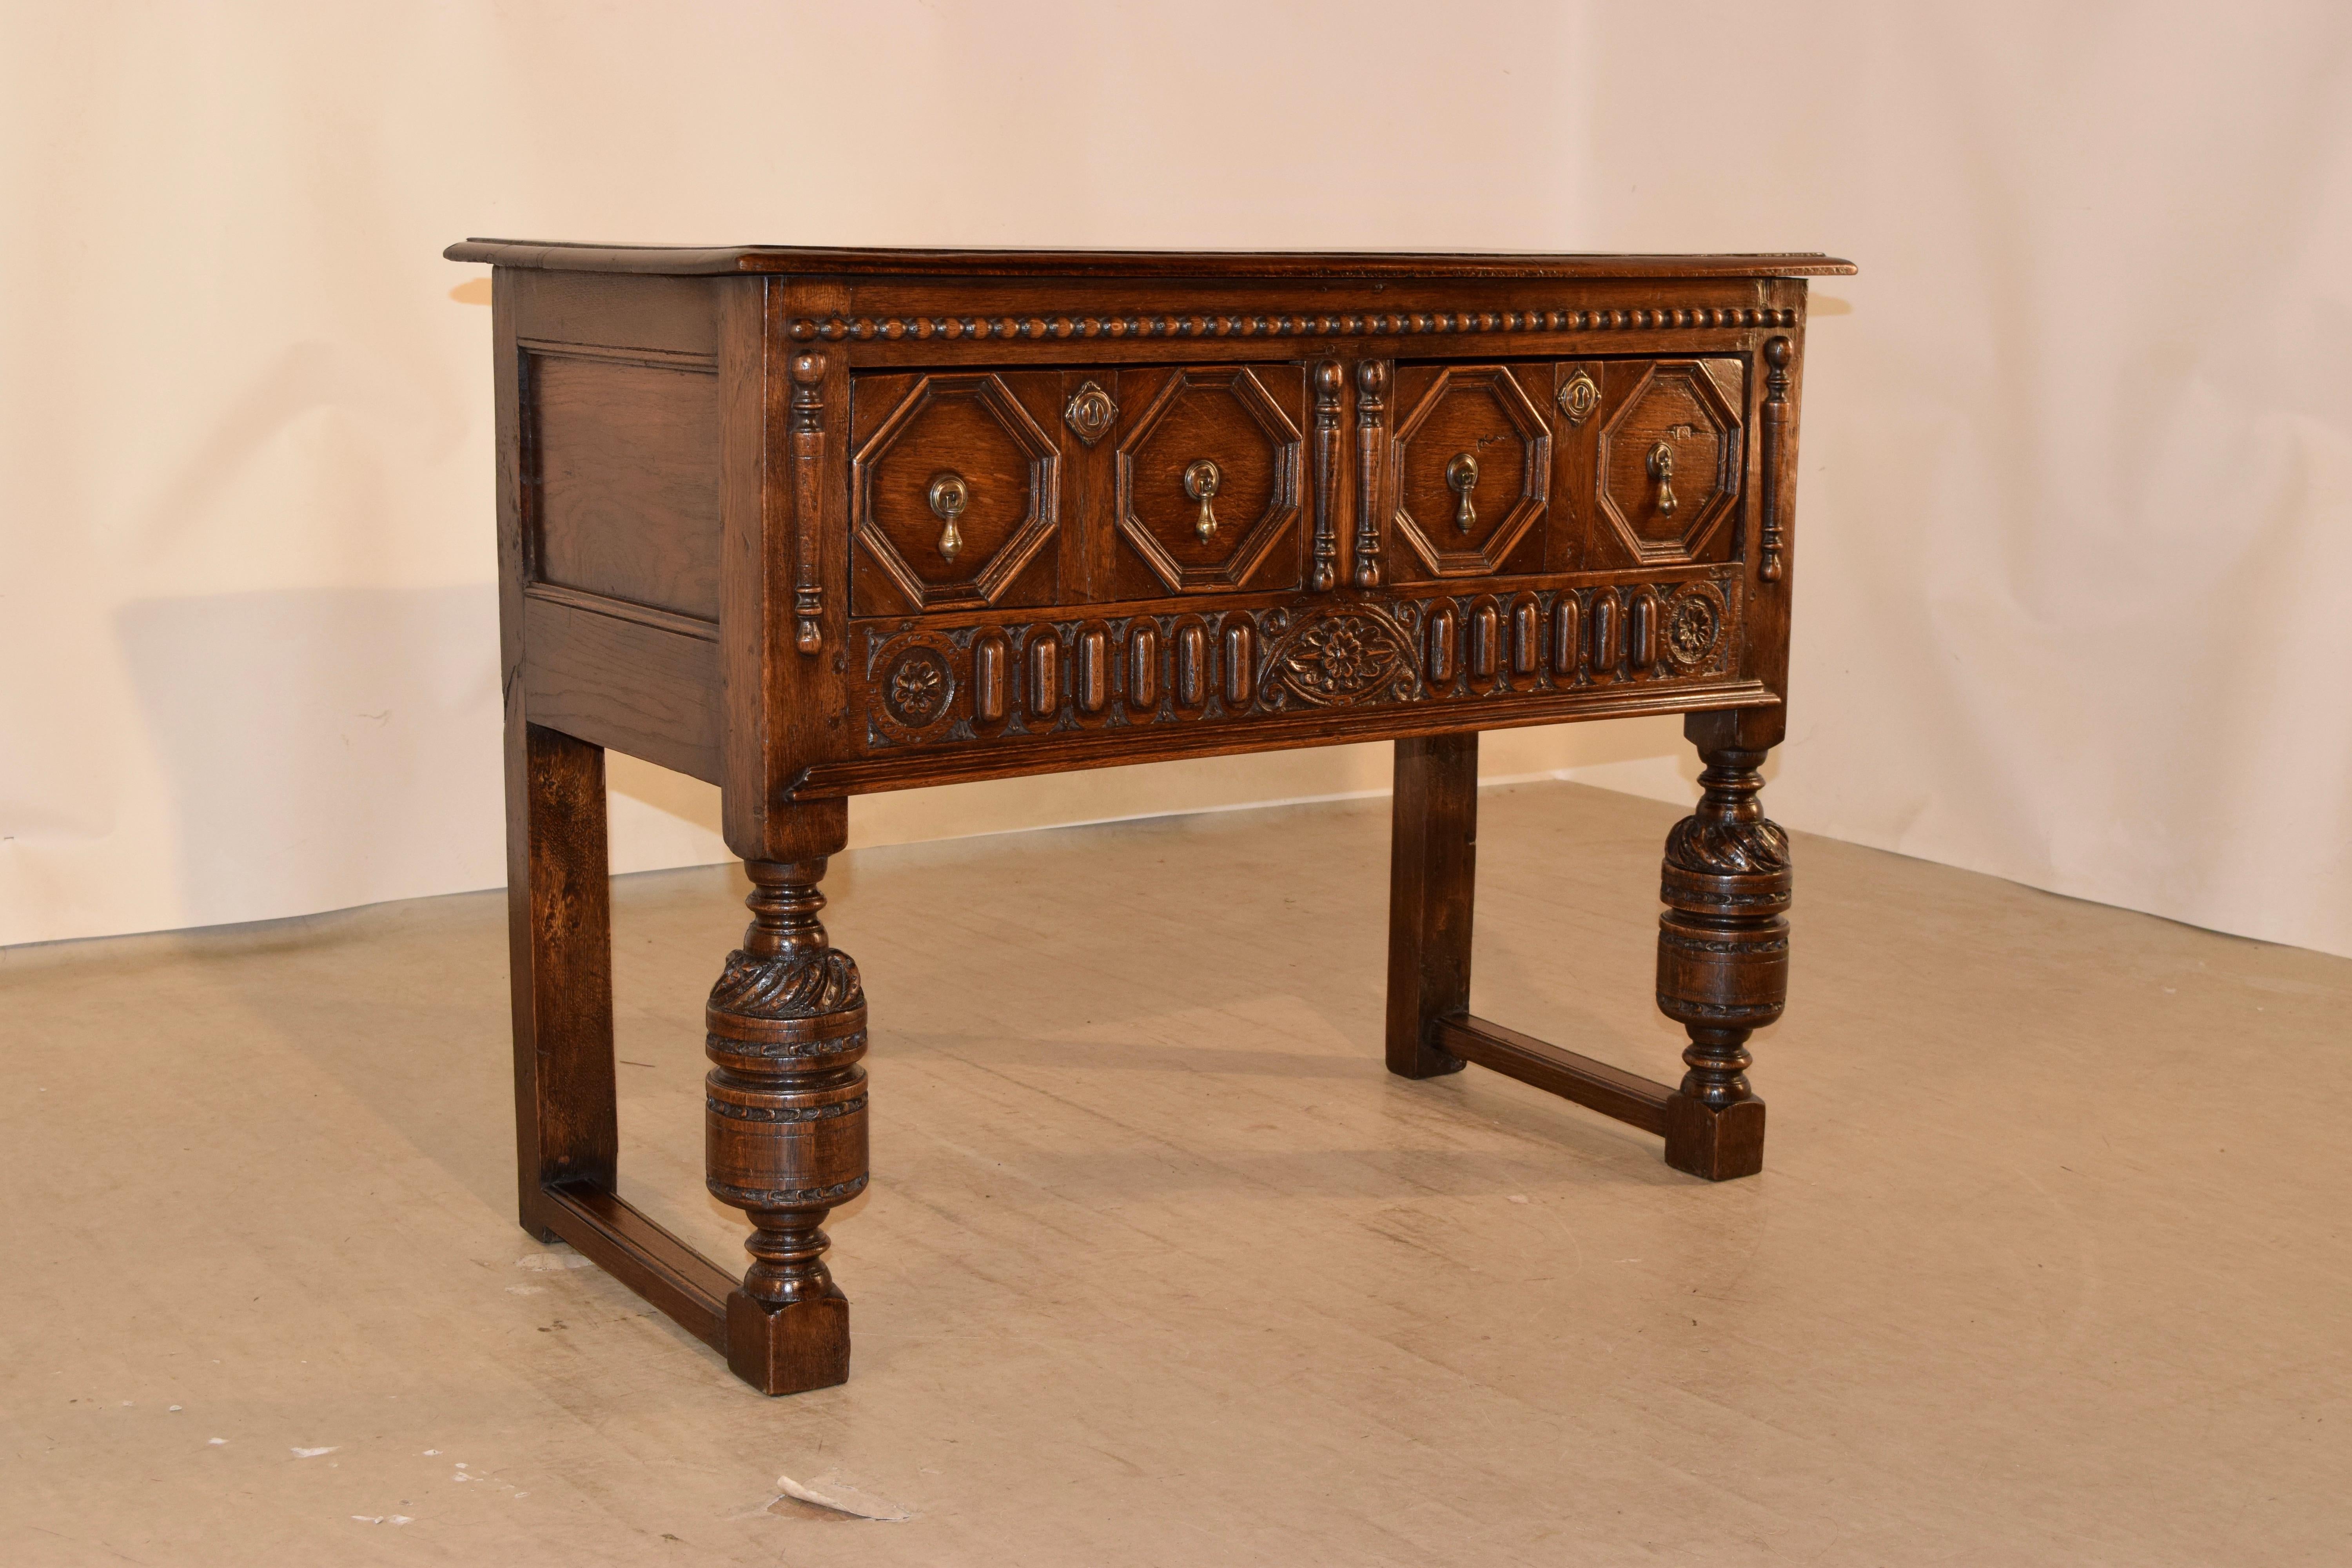 19th century oak sideboard from England with a beveled edge around the top, following down to paneled sides and two drawers in the front with raised geometric panels, flanked by hand-turned applied moldings and a beaded molding across the top. The